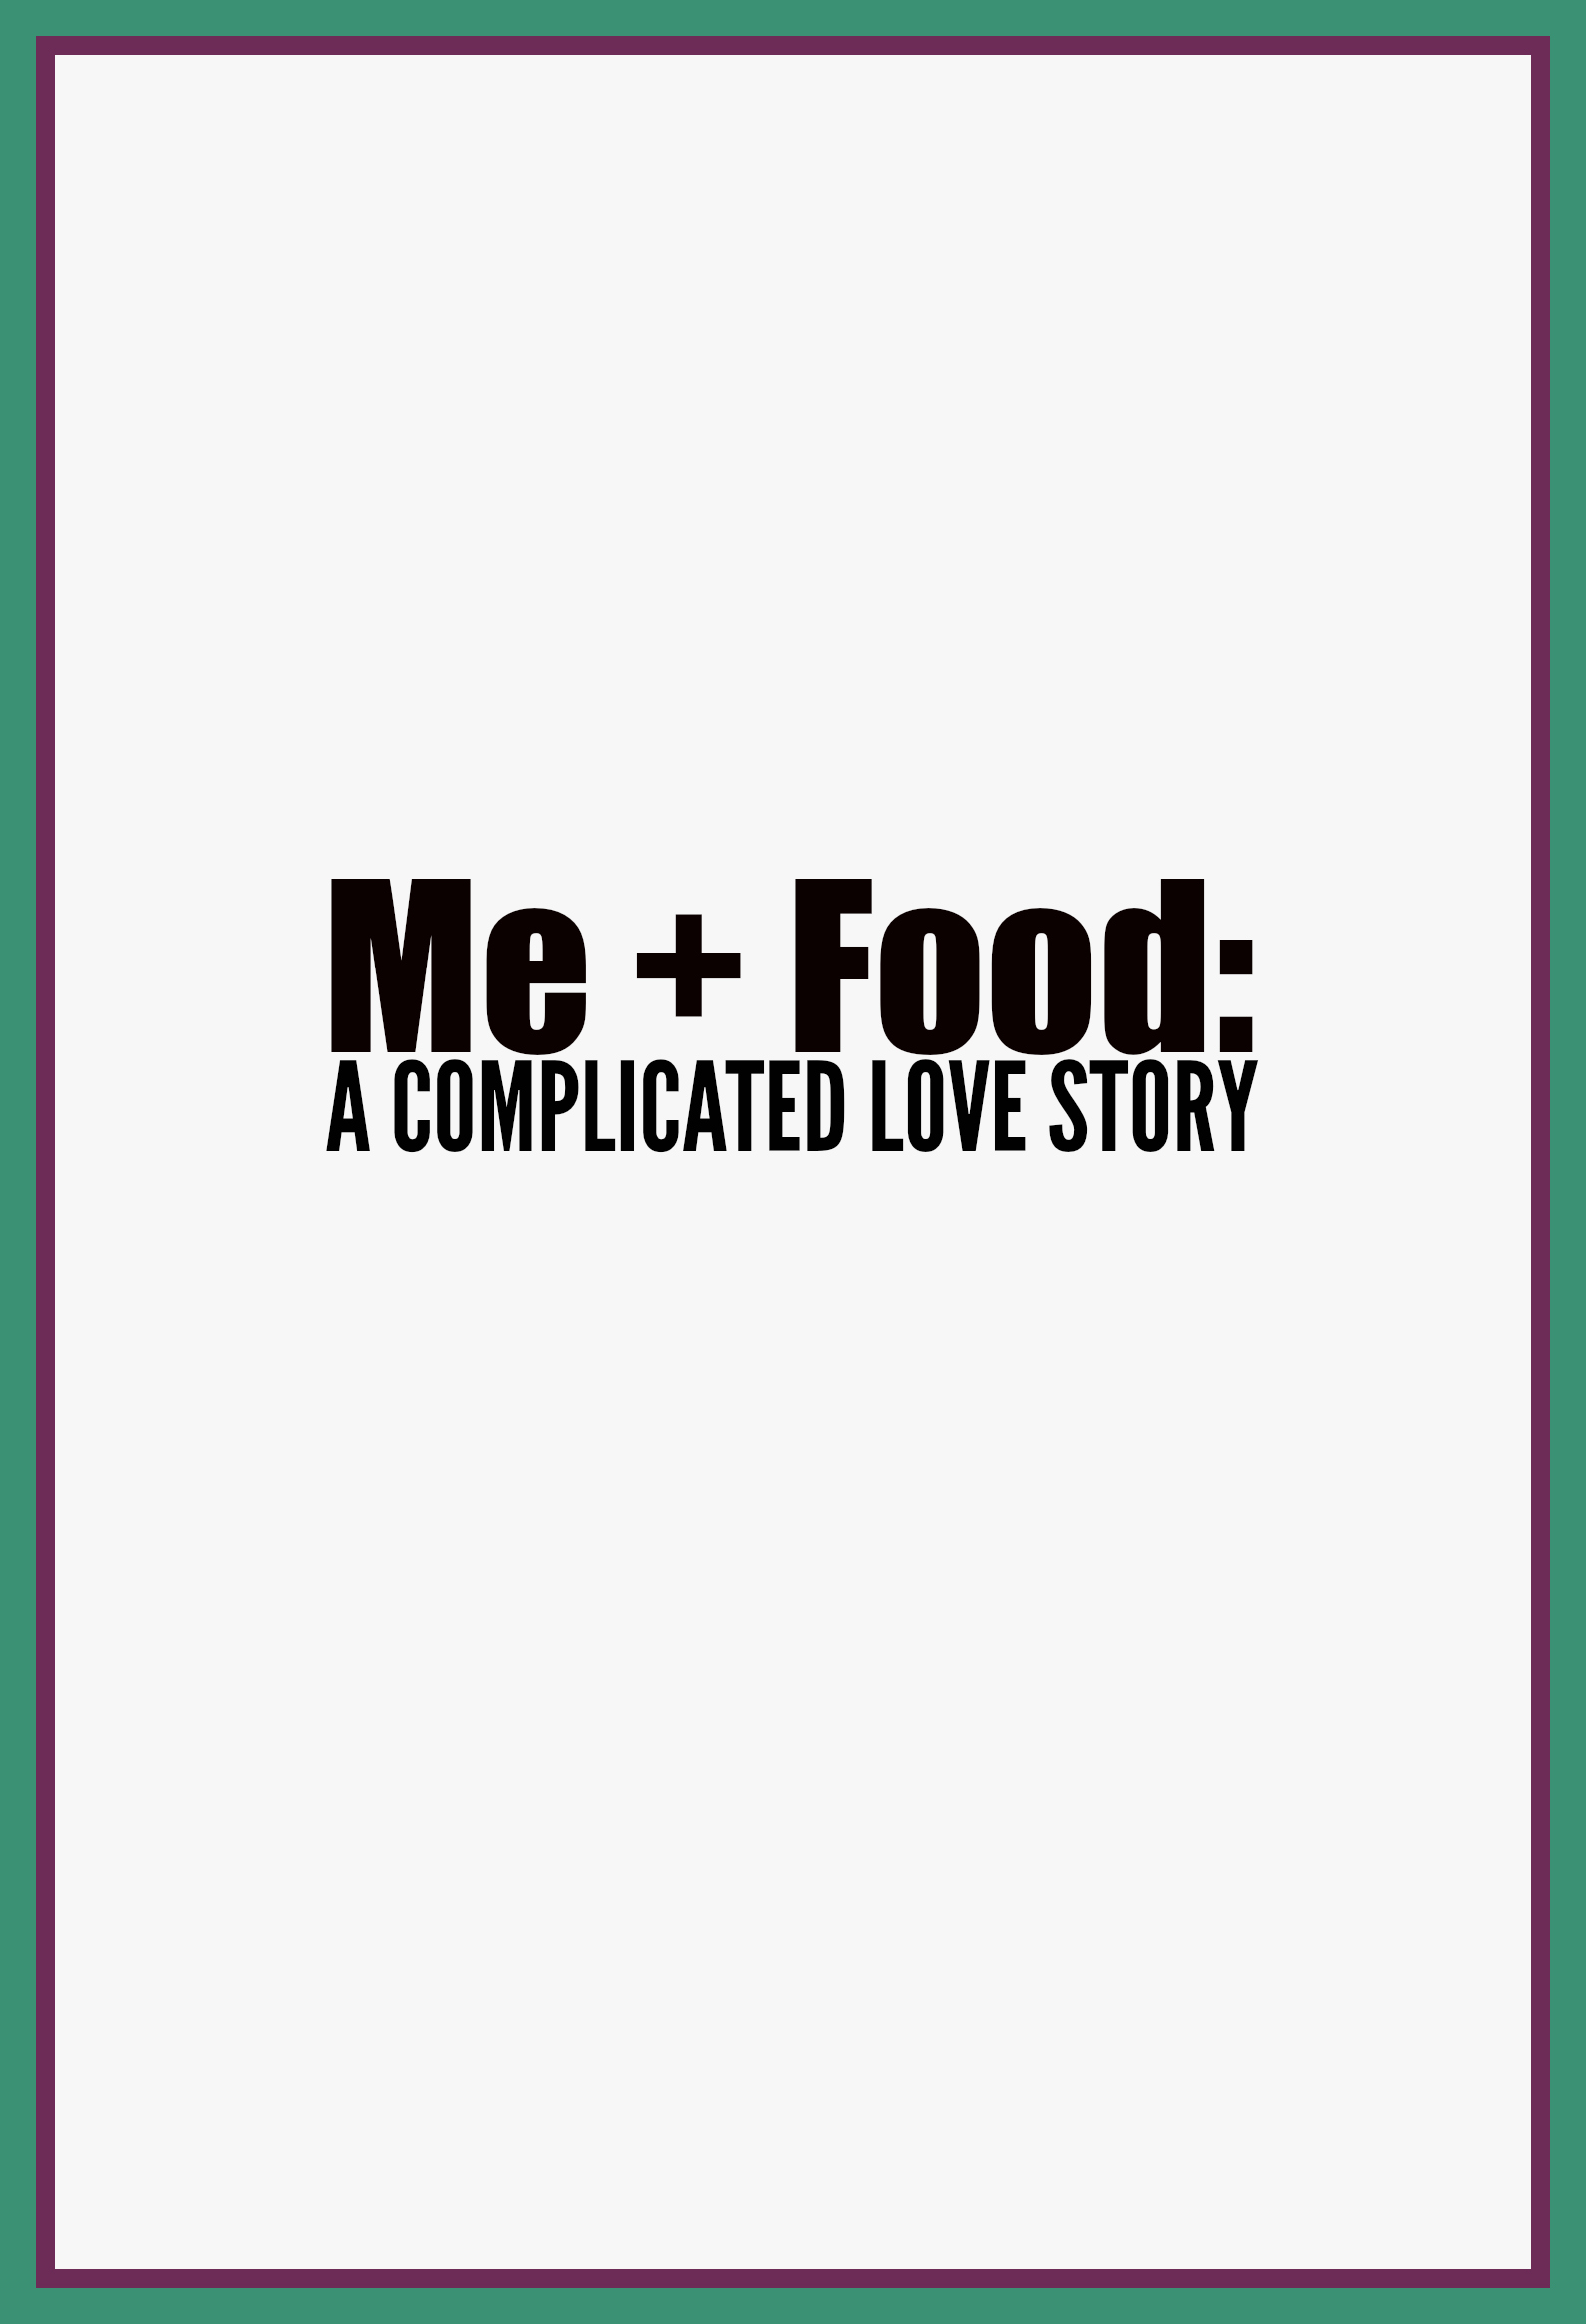 Me + Food: A Complicated Love Story